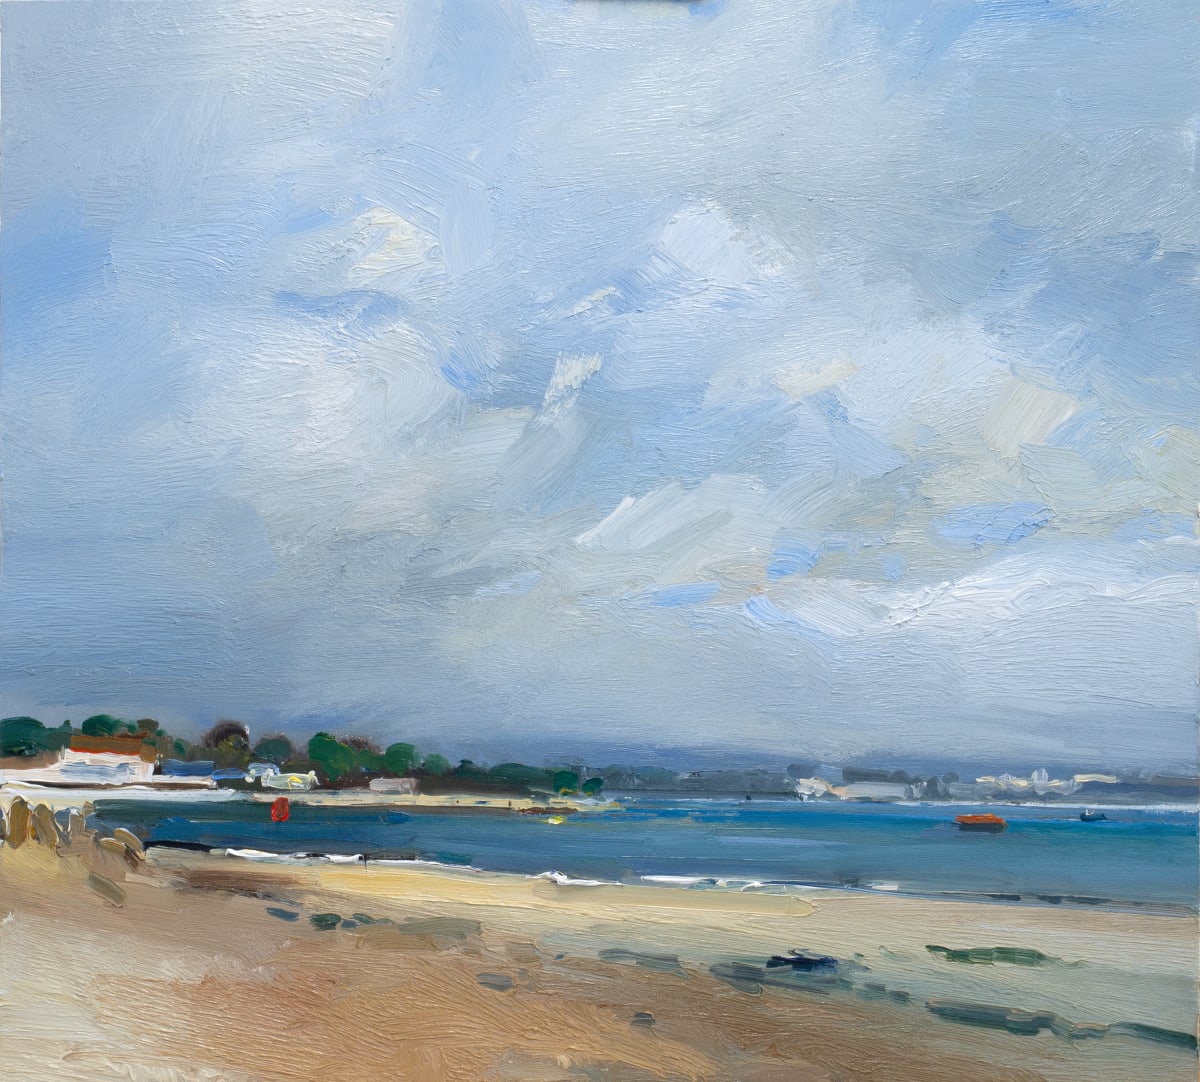 A Sunny Day Poole Harbour. Dorset by David Atkins 